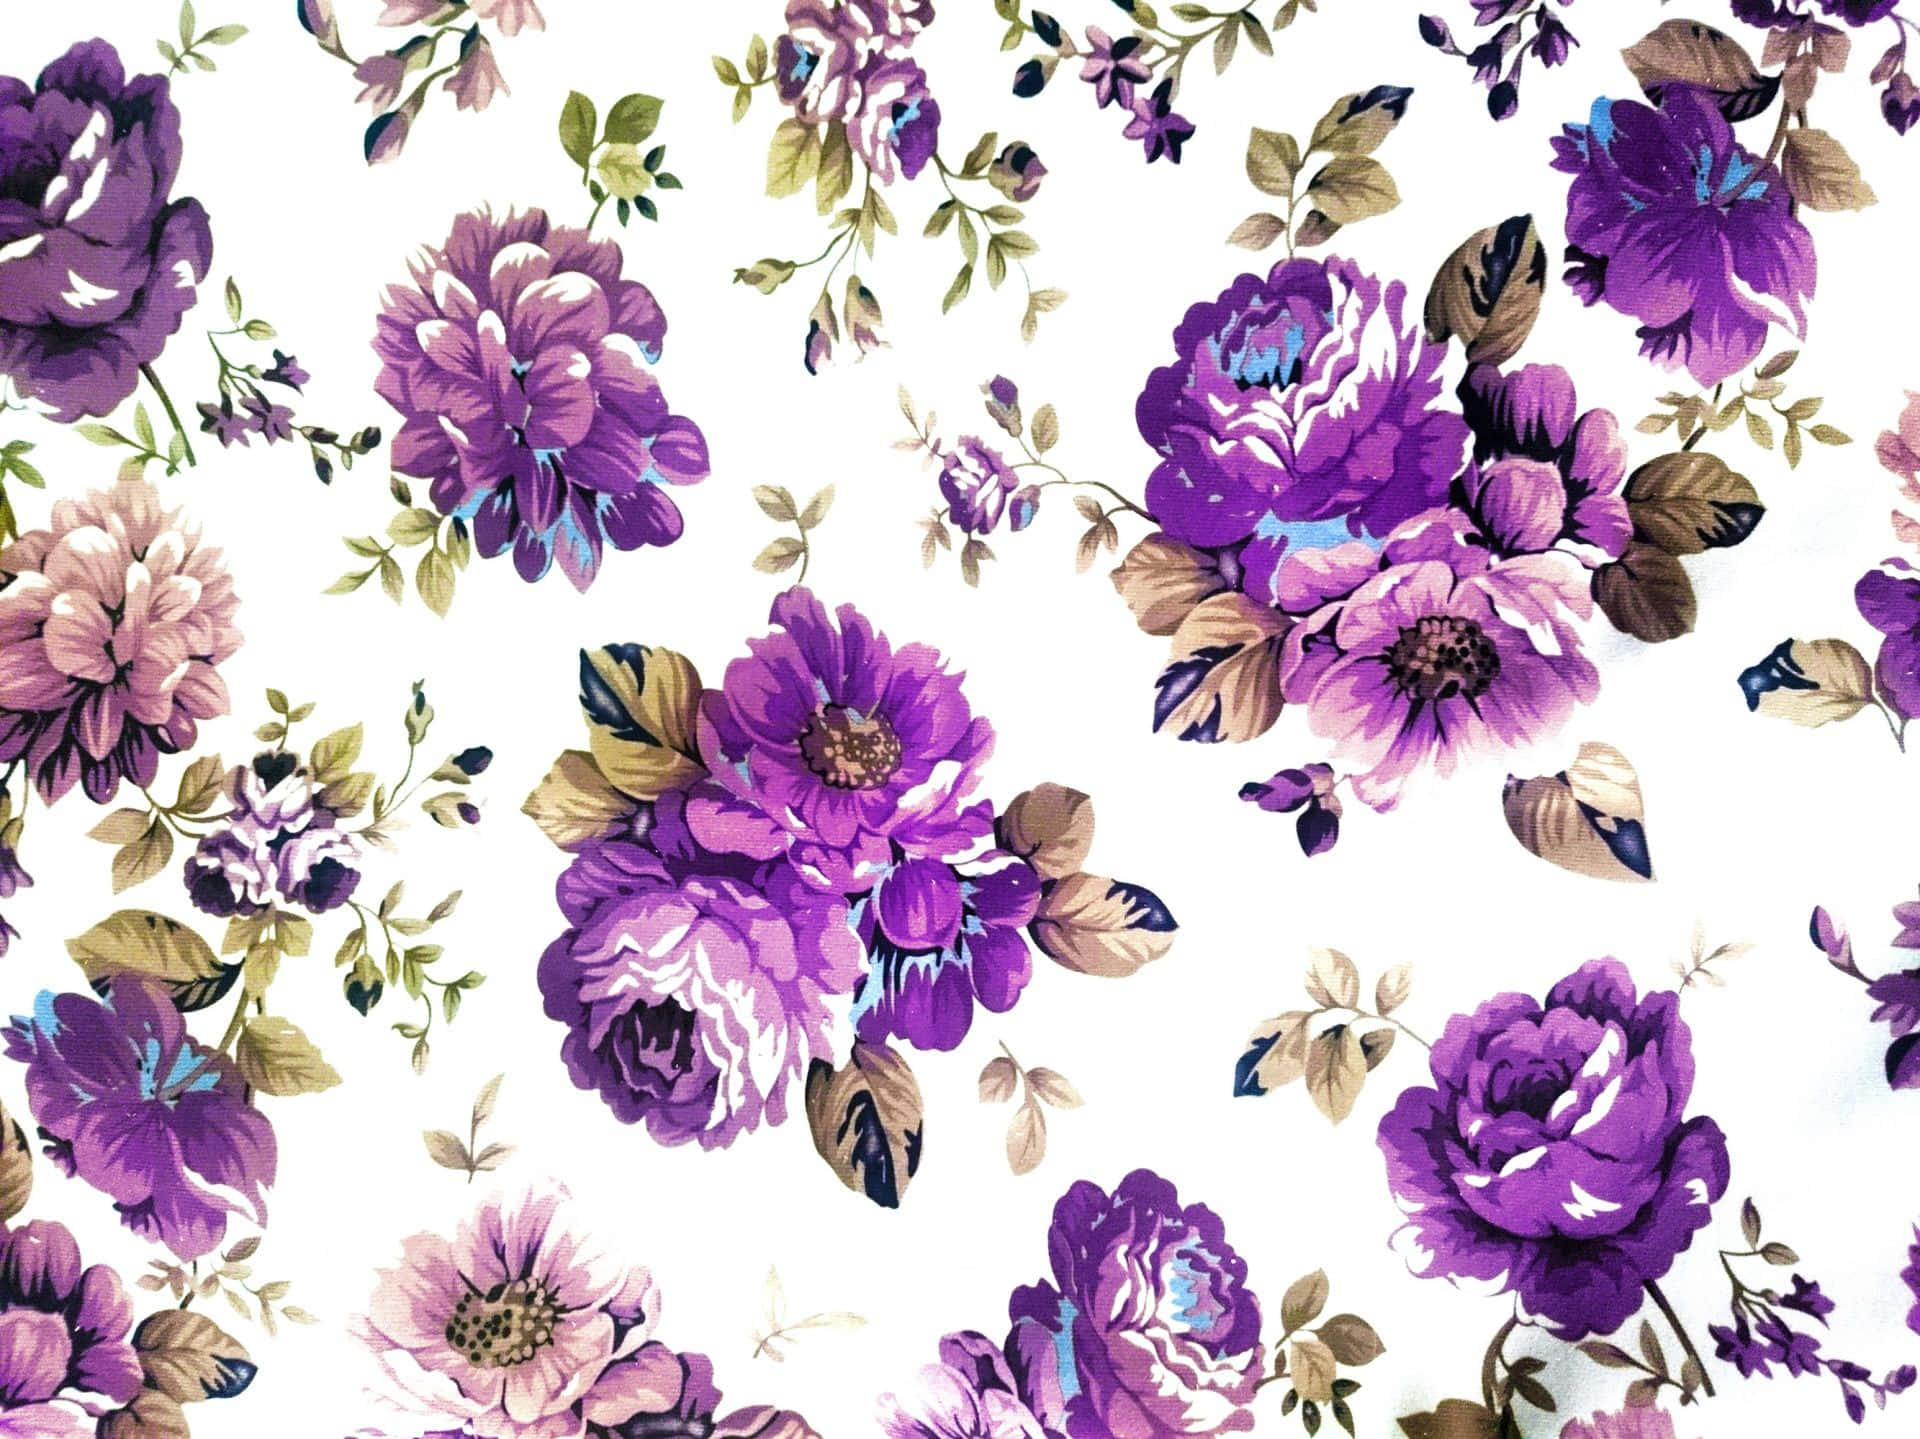 "A beautiful purple floral background, perfect for adding a touch of elegance to any event or occasion."